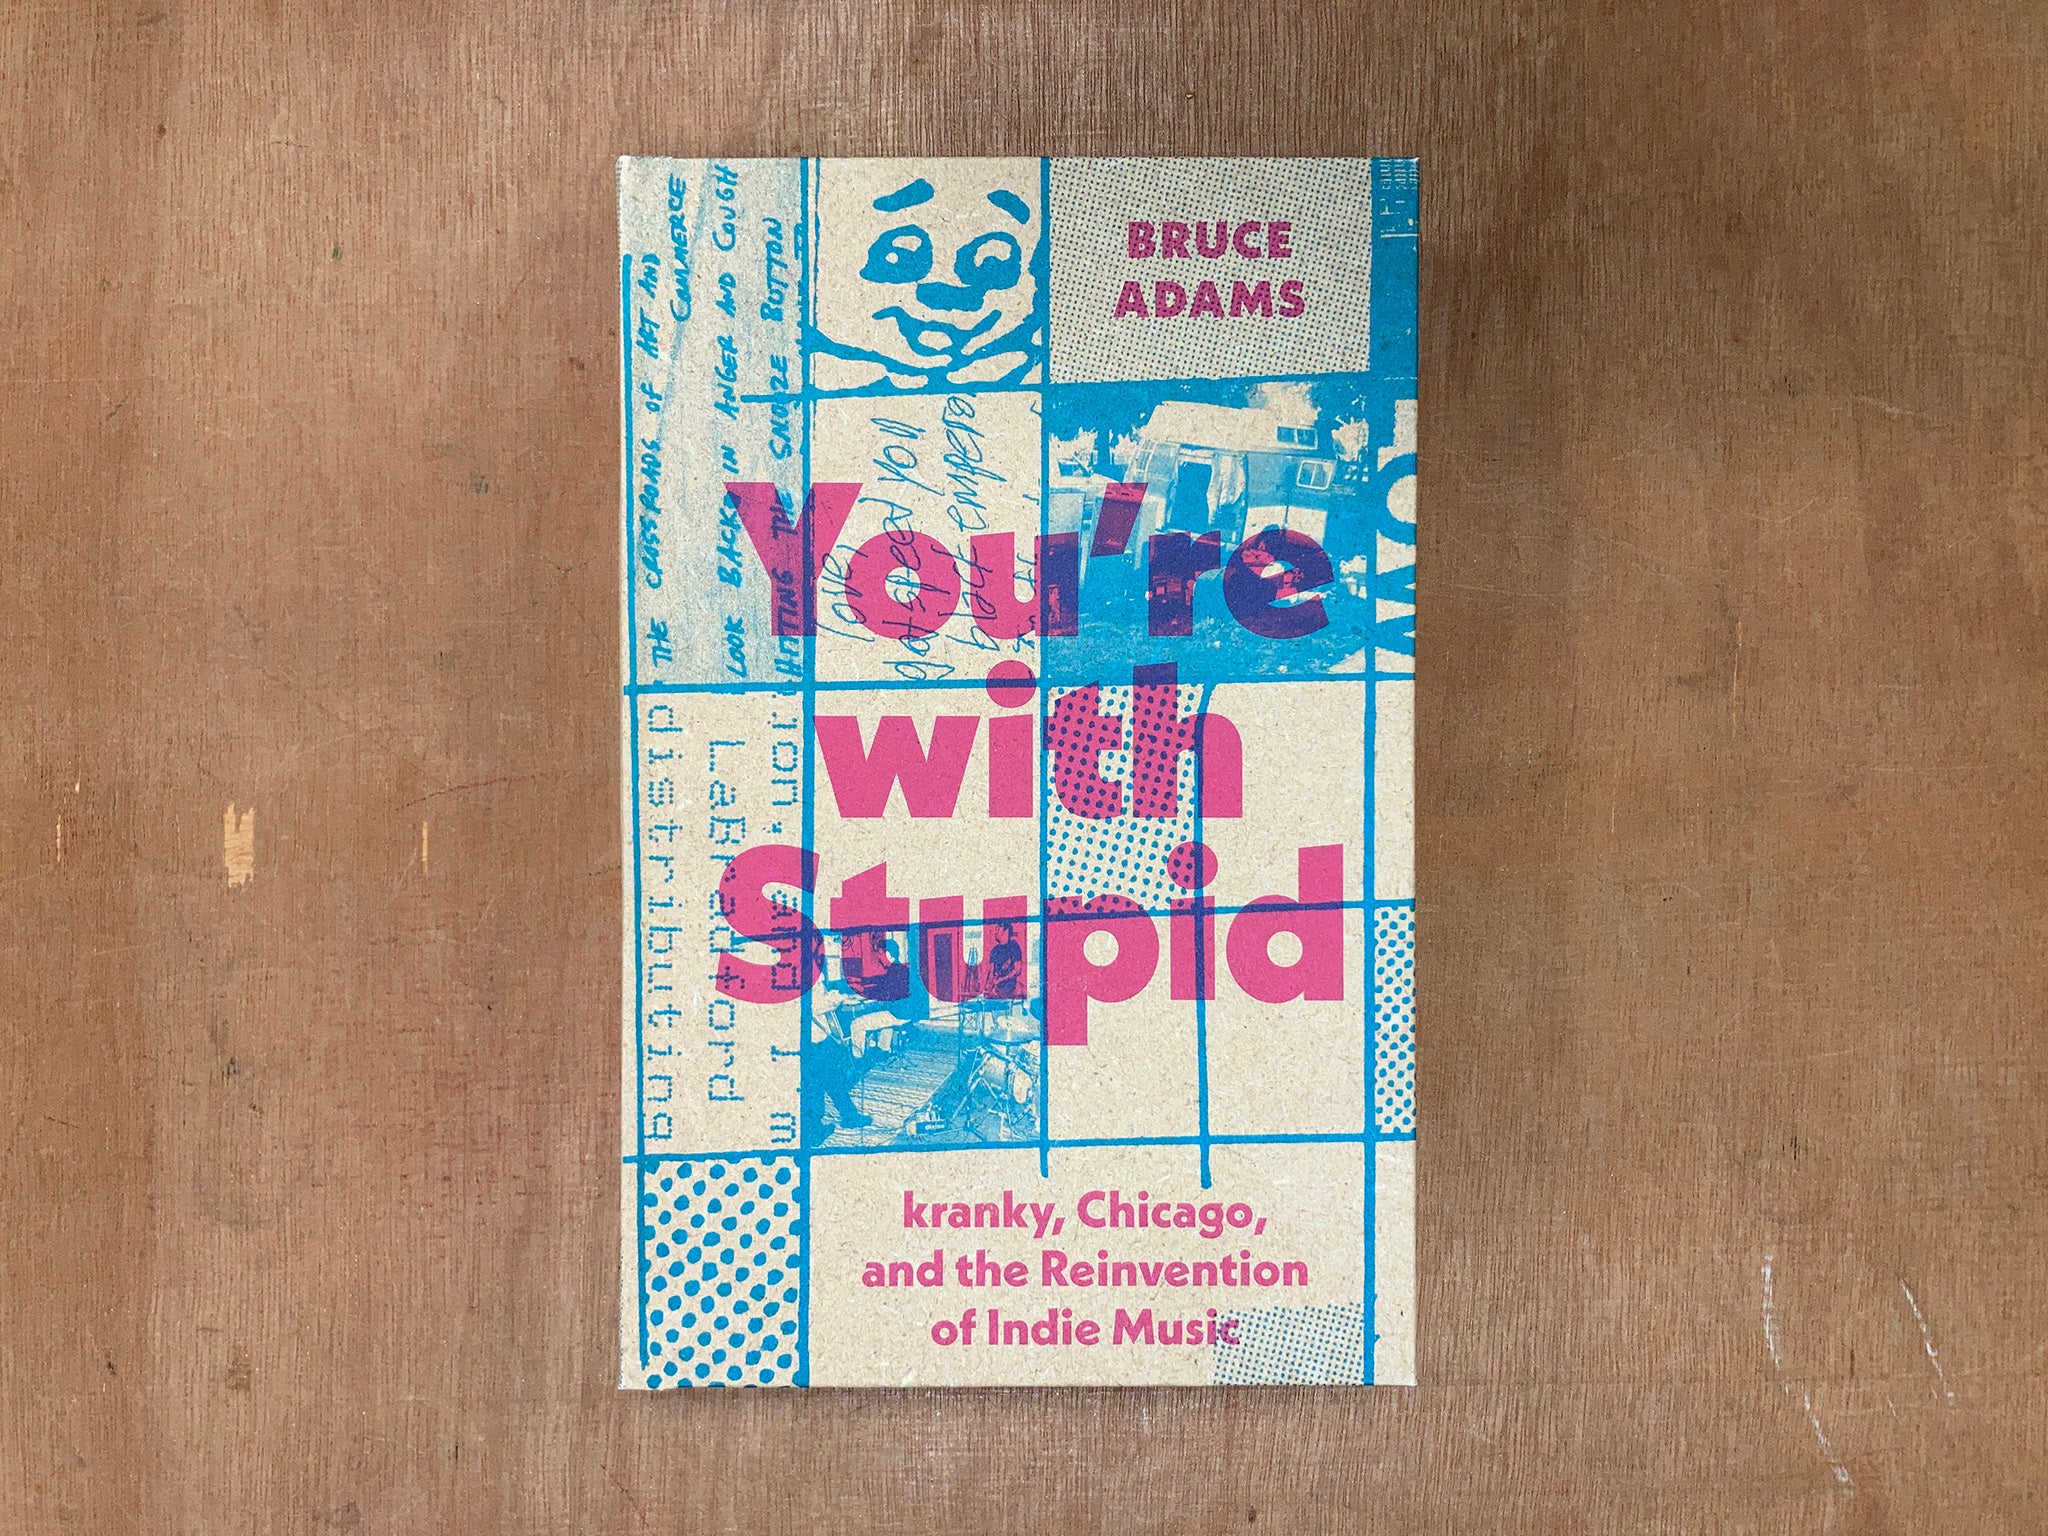 YOU'RE WITH STUPID: KRANKY, CHICAGO, AND THE REINVENTION OF INDIE MUSIC by Bruce Adams